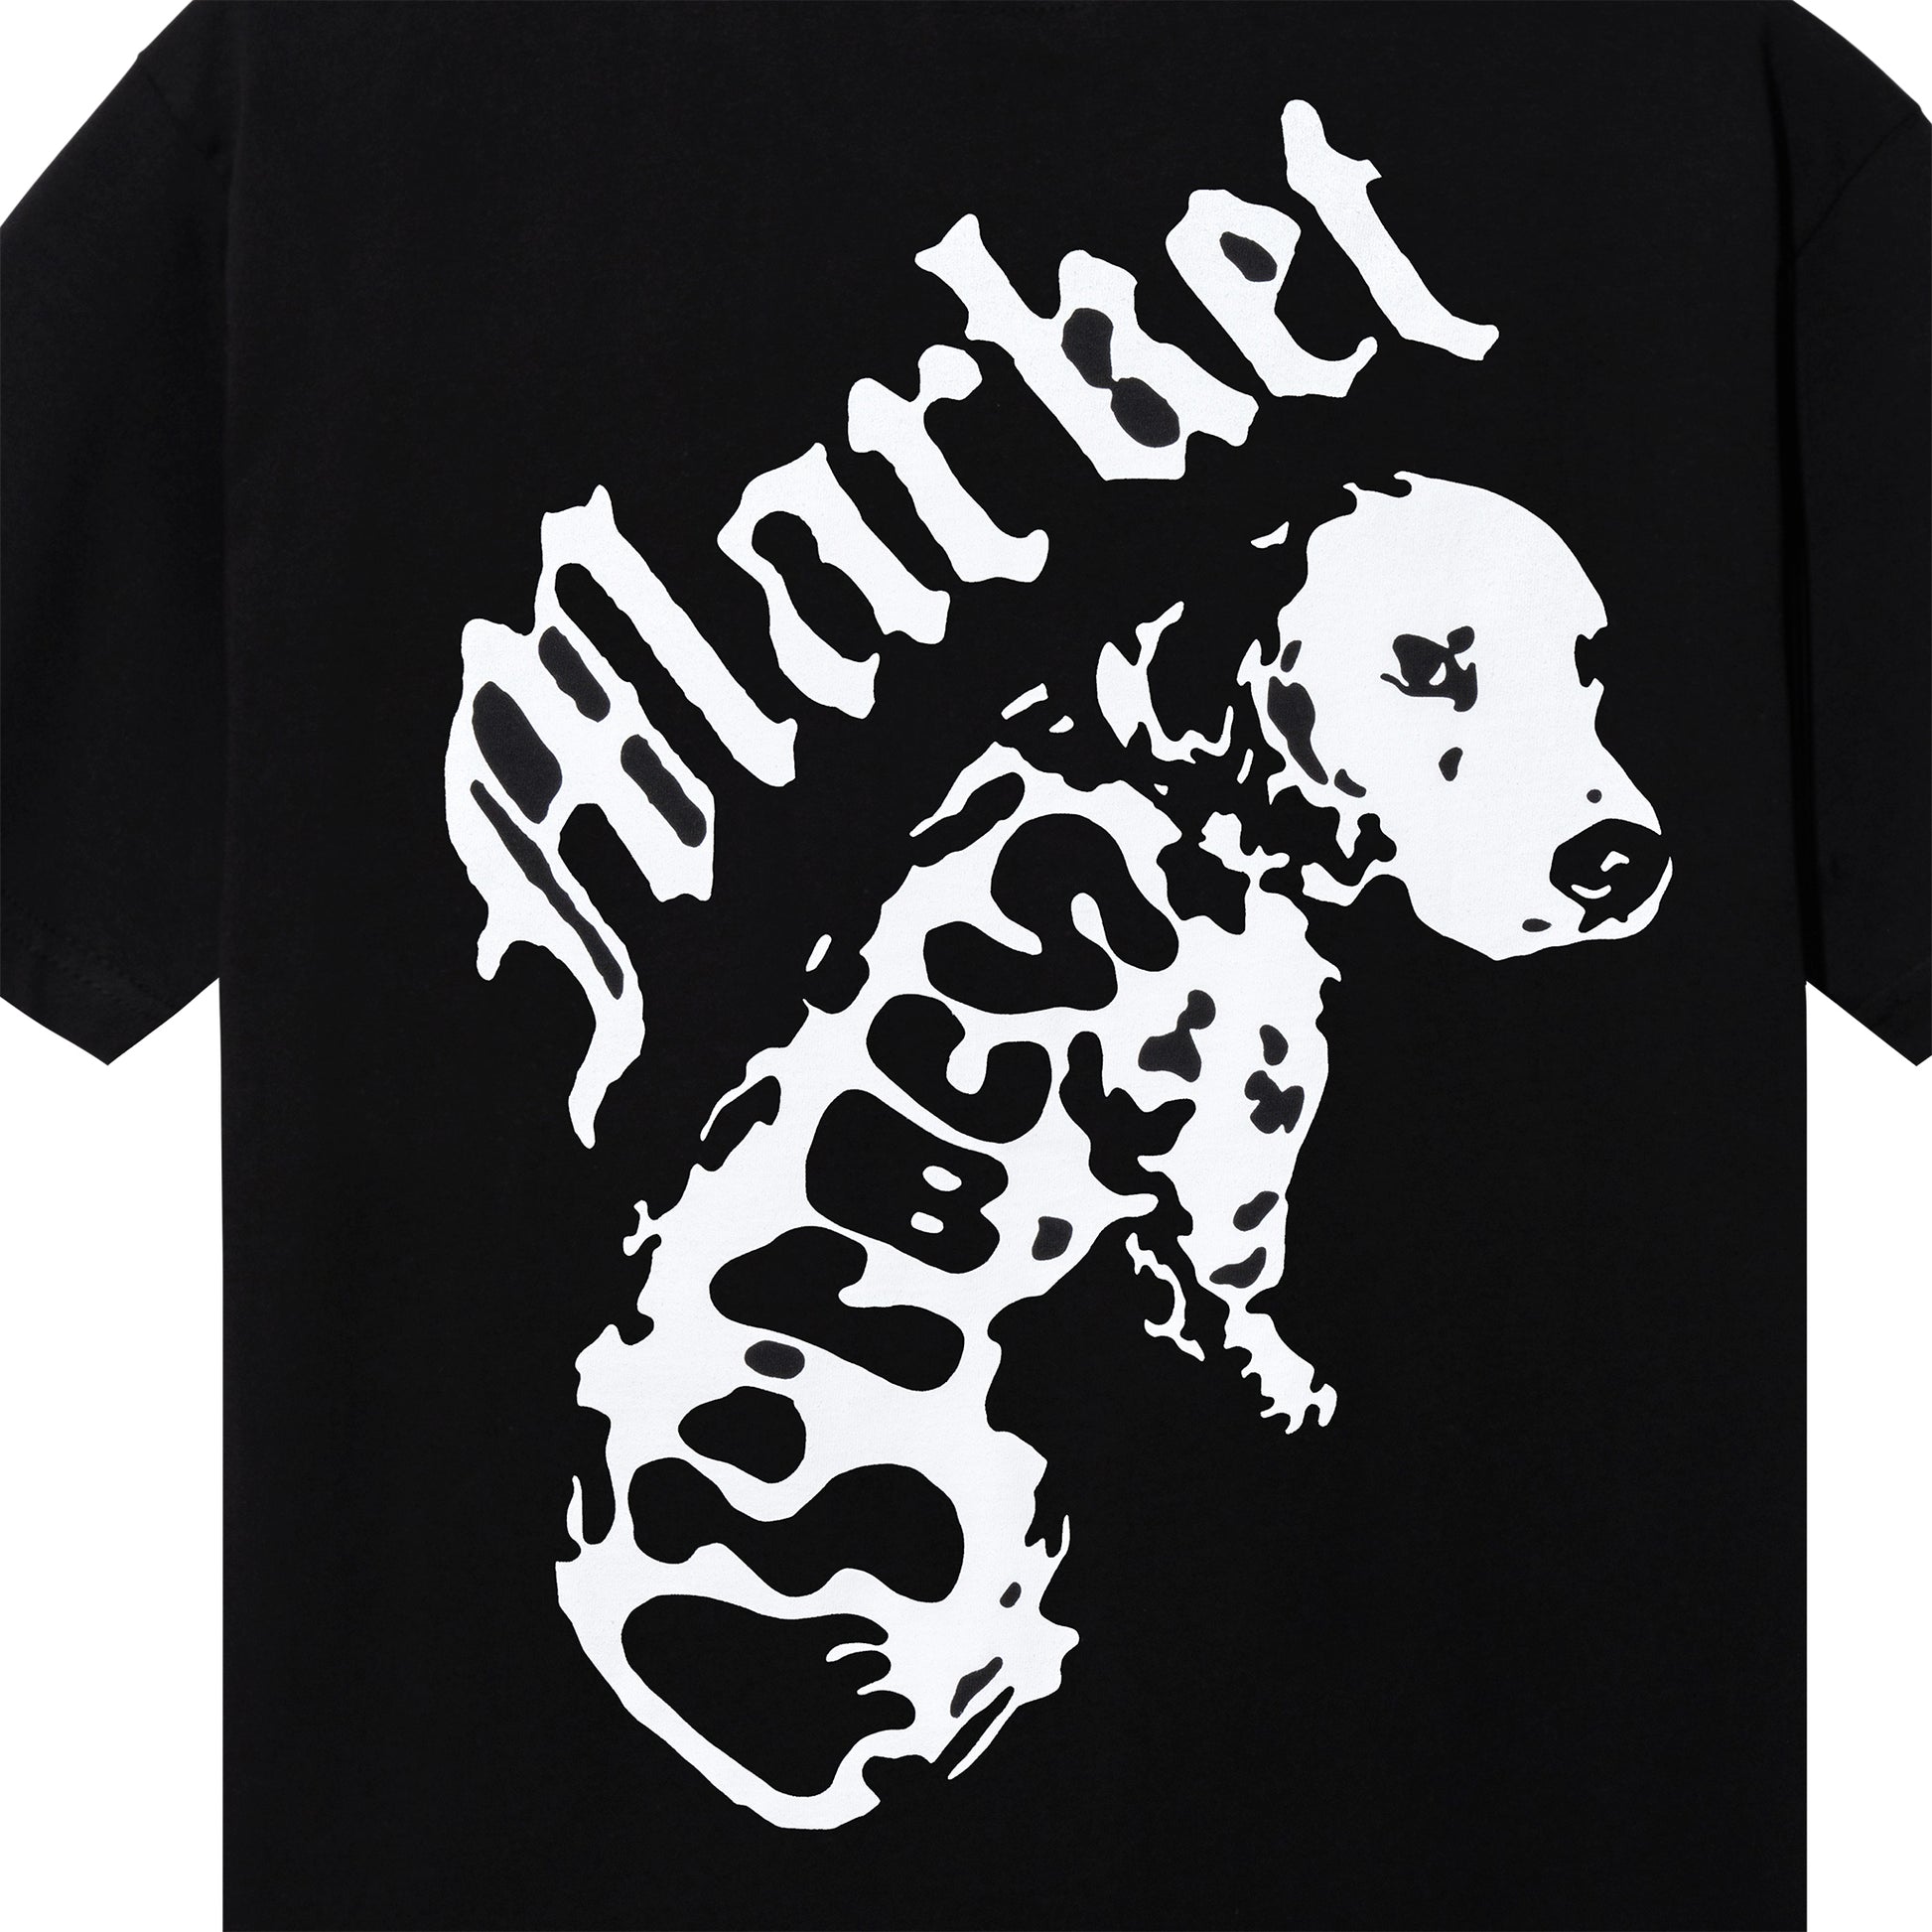 MARKET clothing brand MKT SUBLIME GARDEN GROVE DOG T-SHIRT. Find more graphic tees, hats, hoodies and more at MarketStudios.com. Formally Chinatown Market.